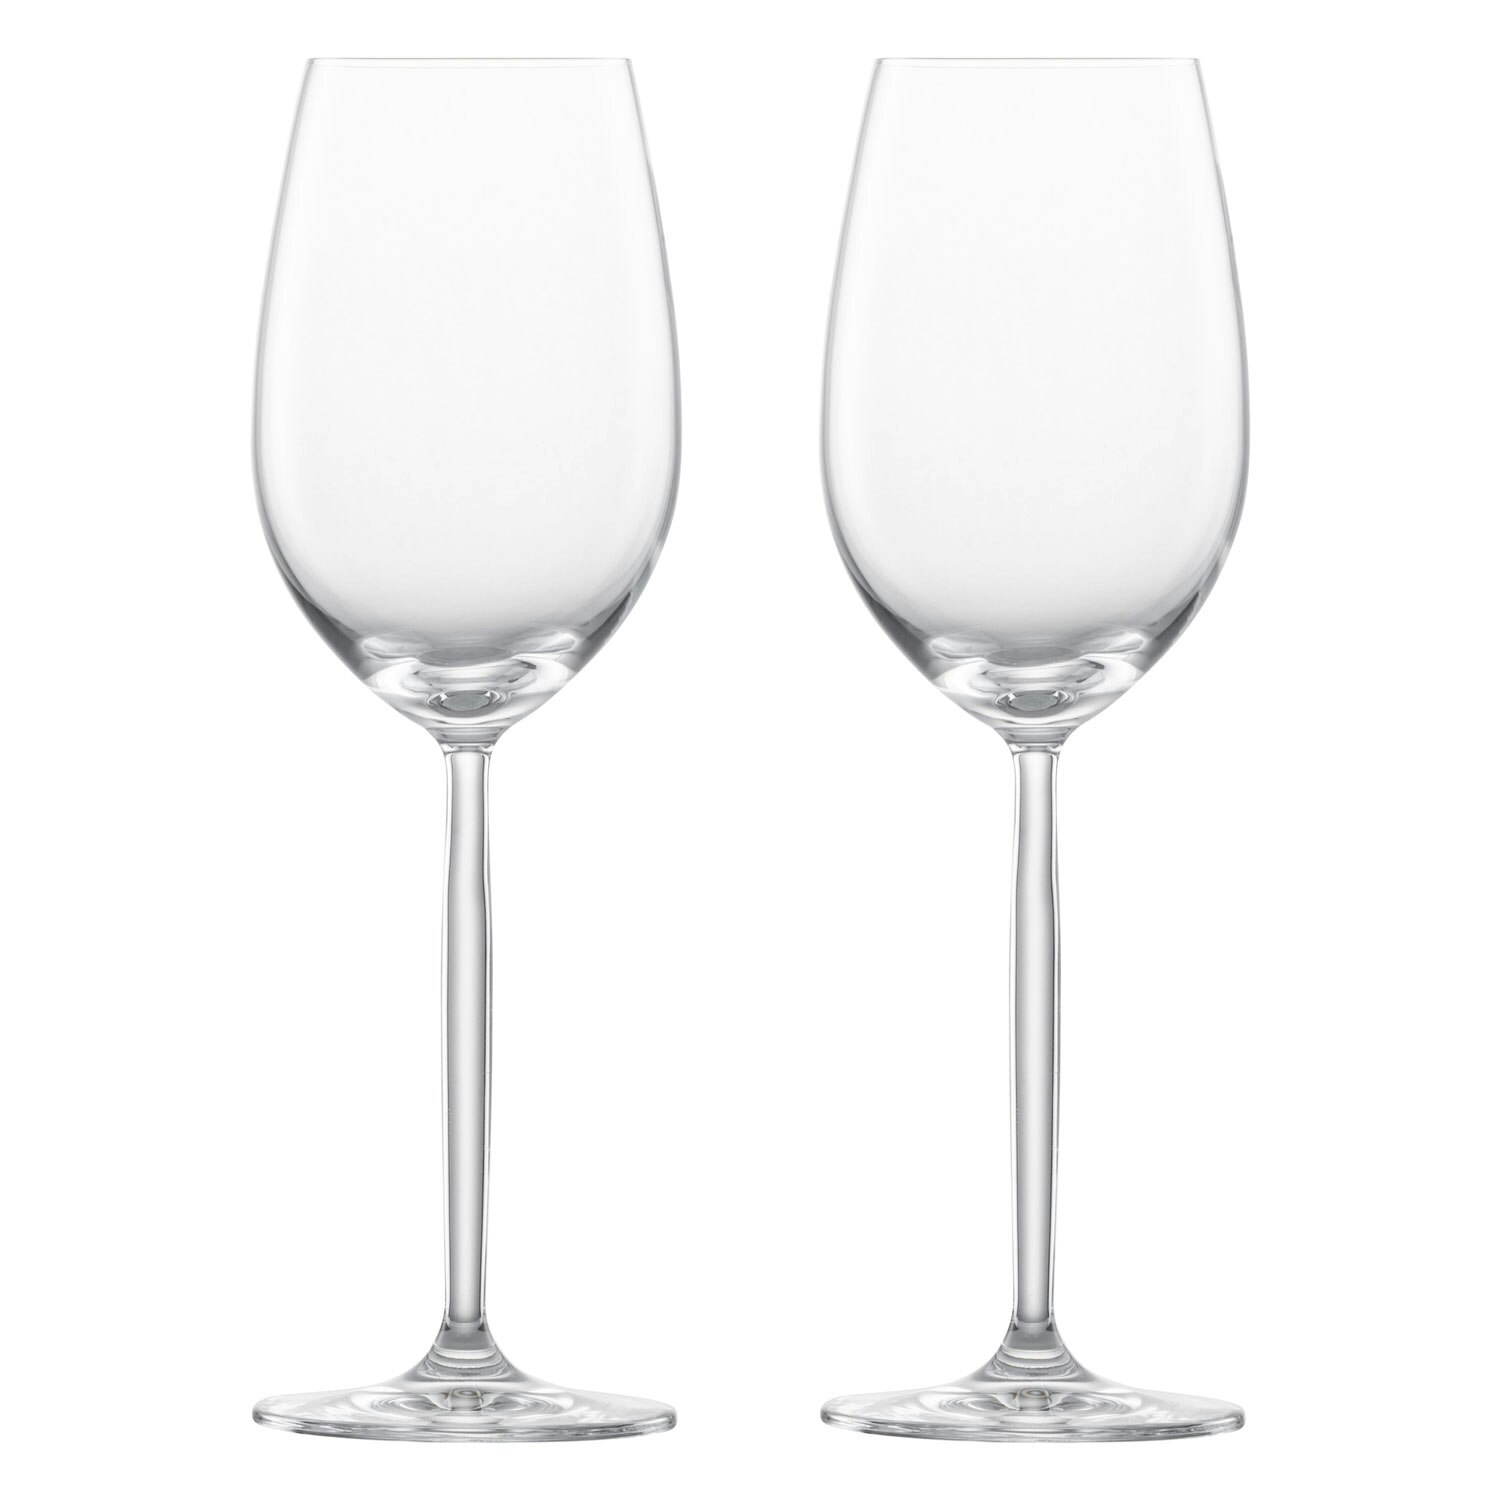 https://royaldesign.com/image/2/zwiesel-diva-champagne-glass-30-cl-2-pack-0